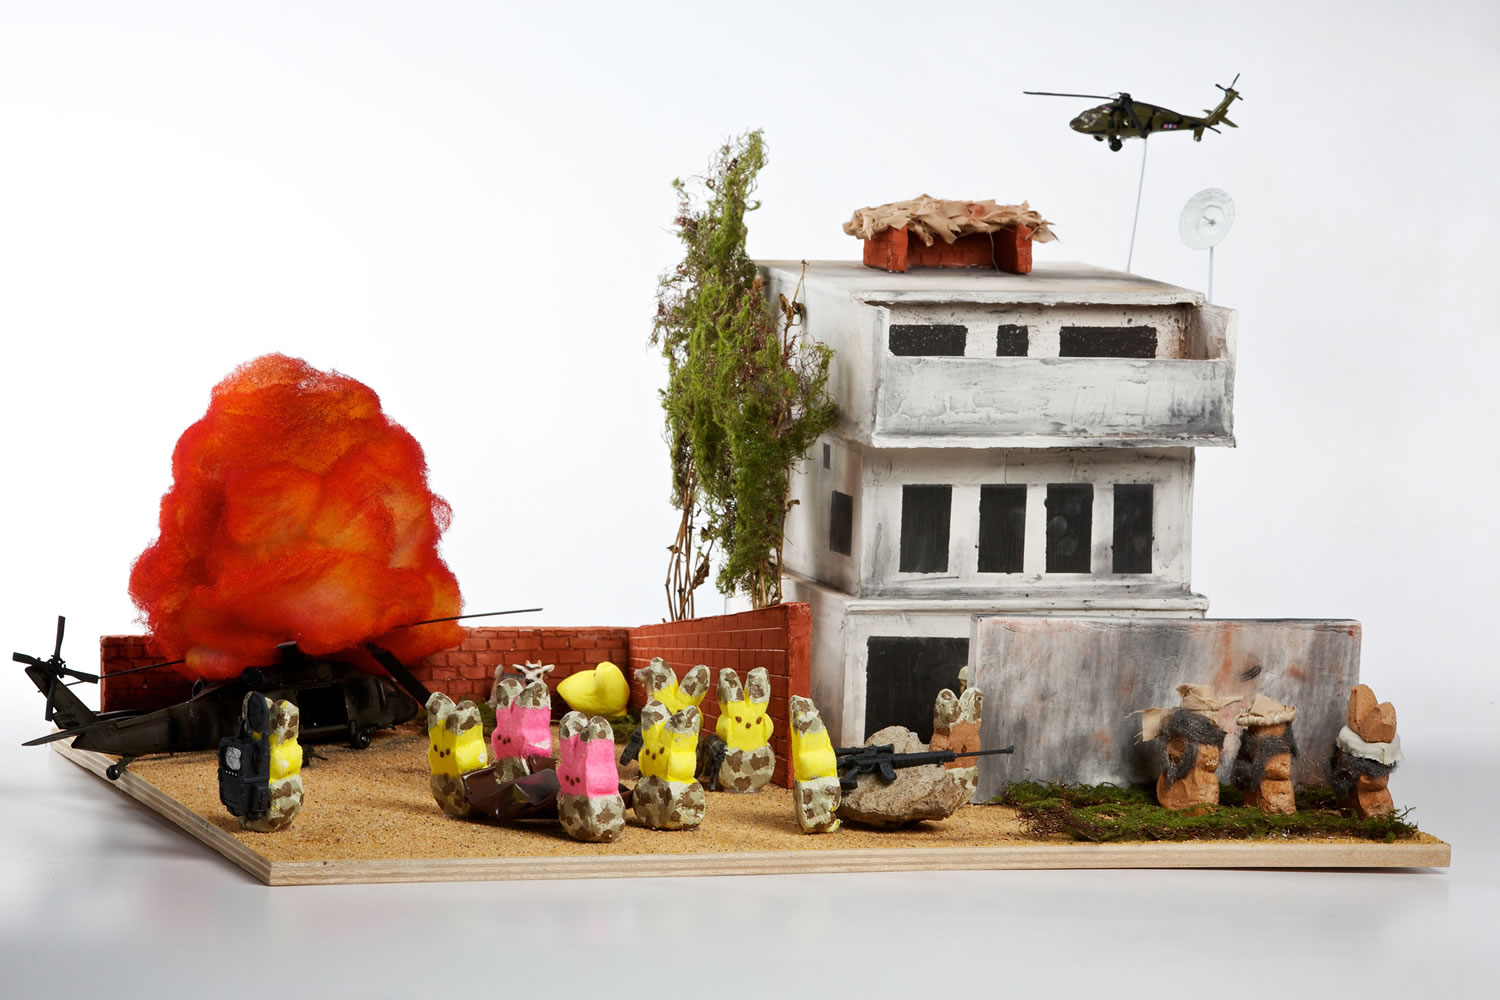 The diorama &quot;Zero Peep Thirty&quot; depicts SEAL Team 6 after killing Osama bin Laden.